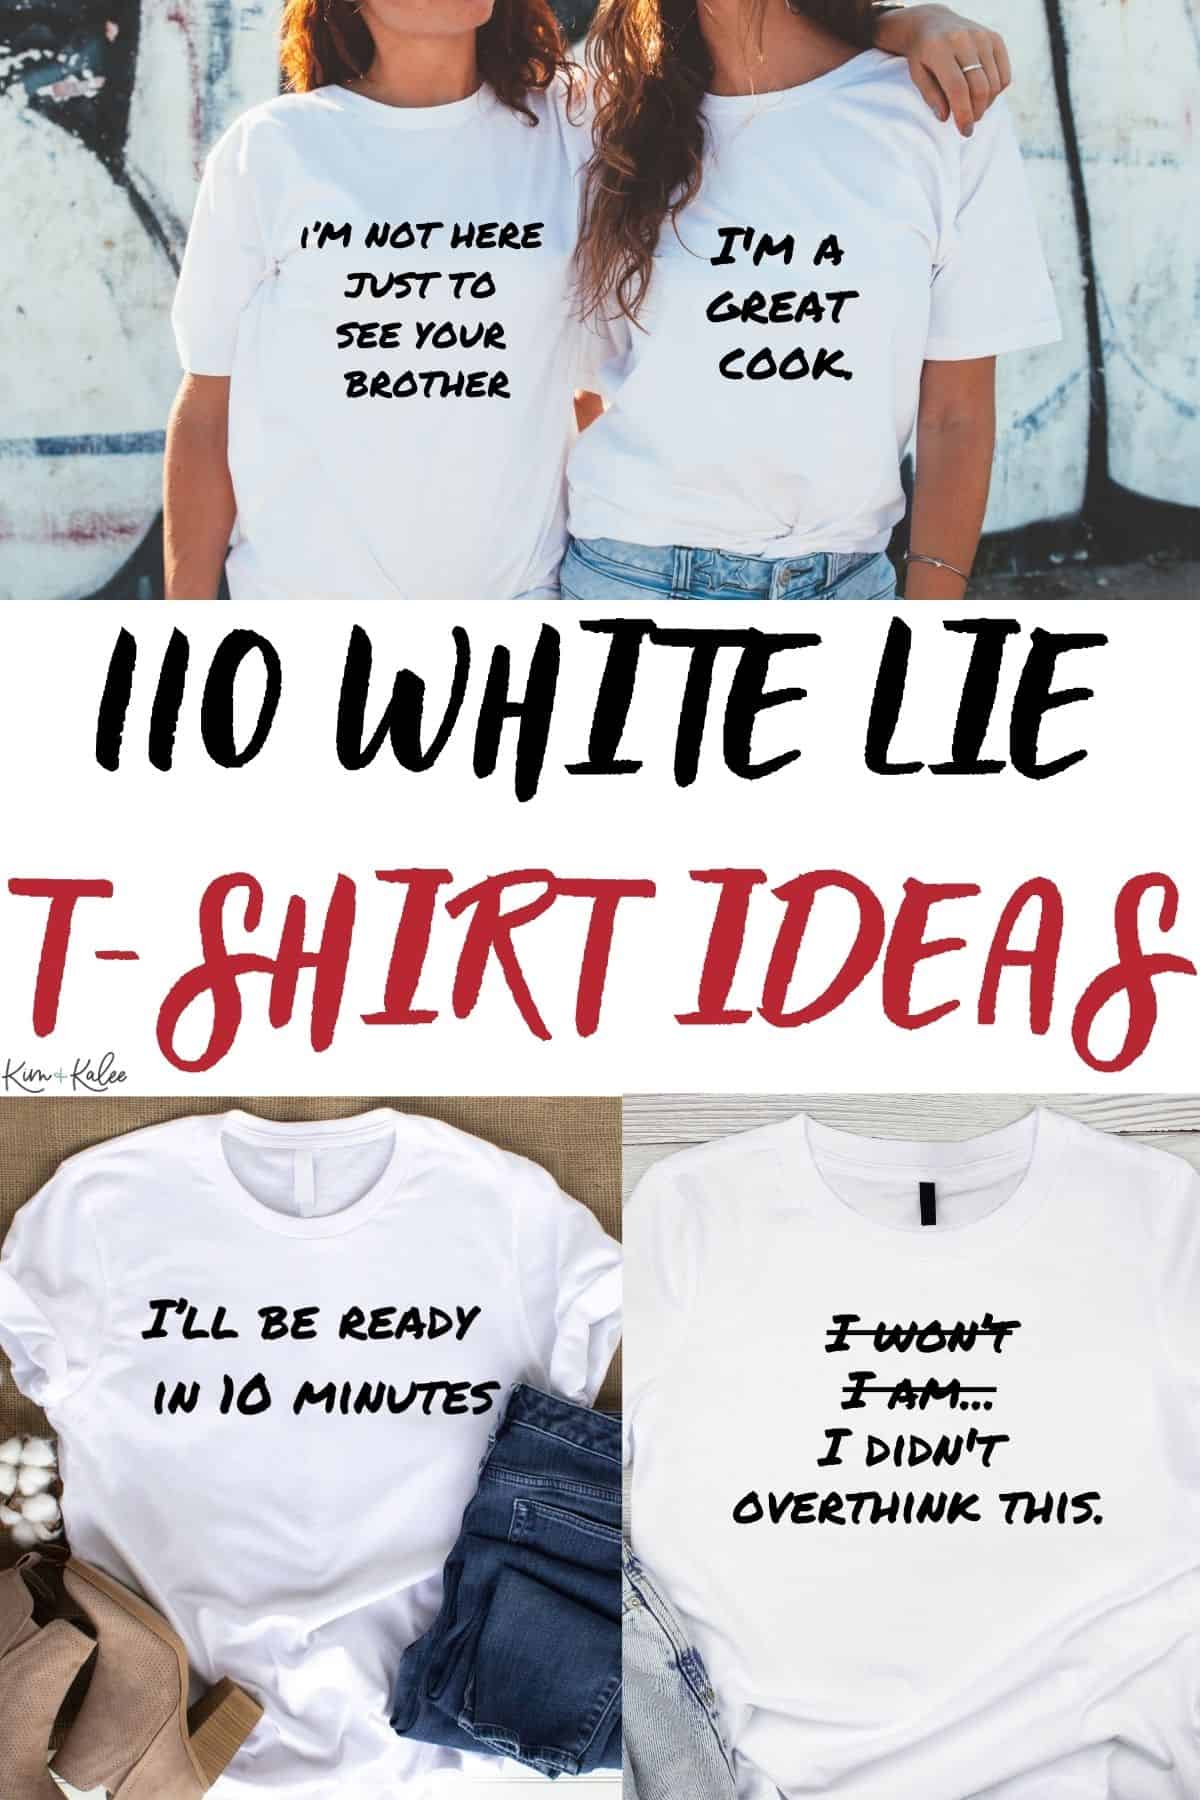 collage of 3 shirts with lies on them - text overlay in the middle says 110 WHITE LIE TSHIRT IDEAS